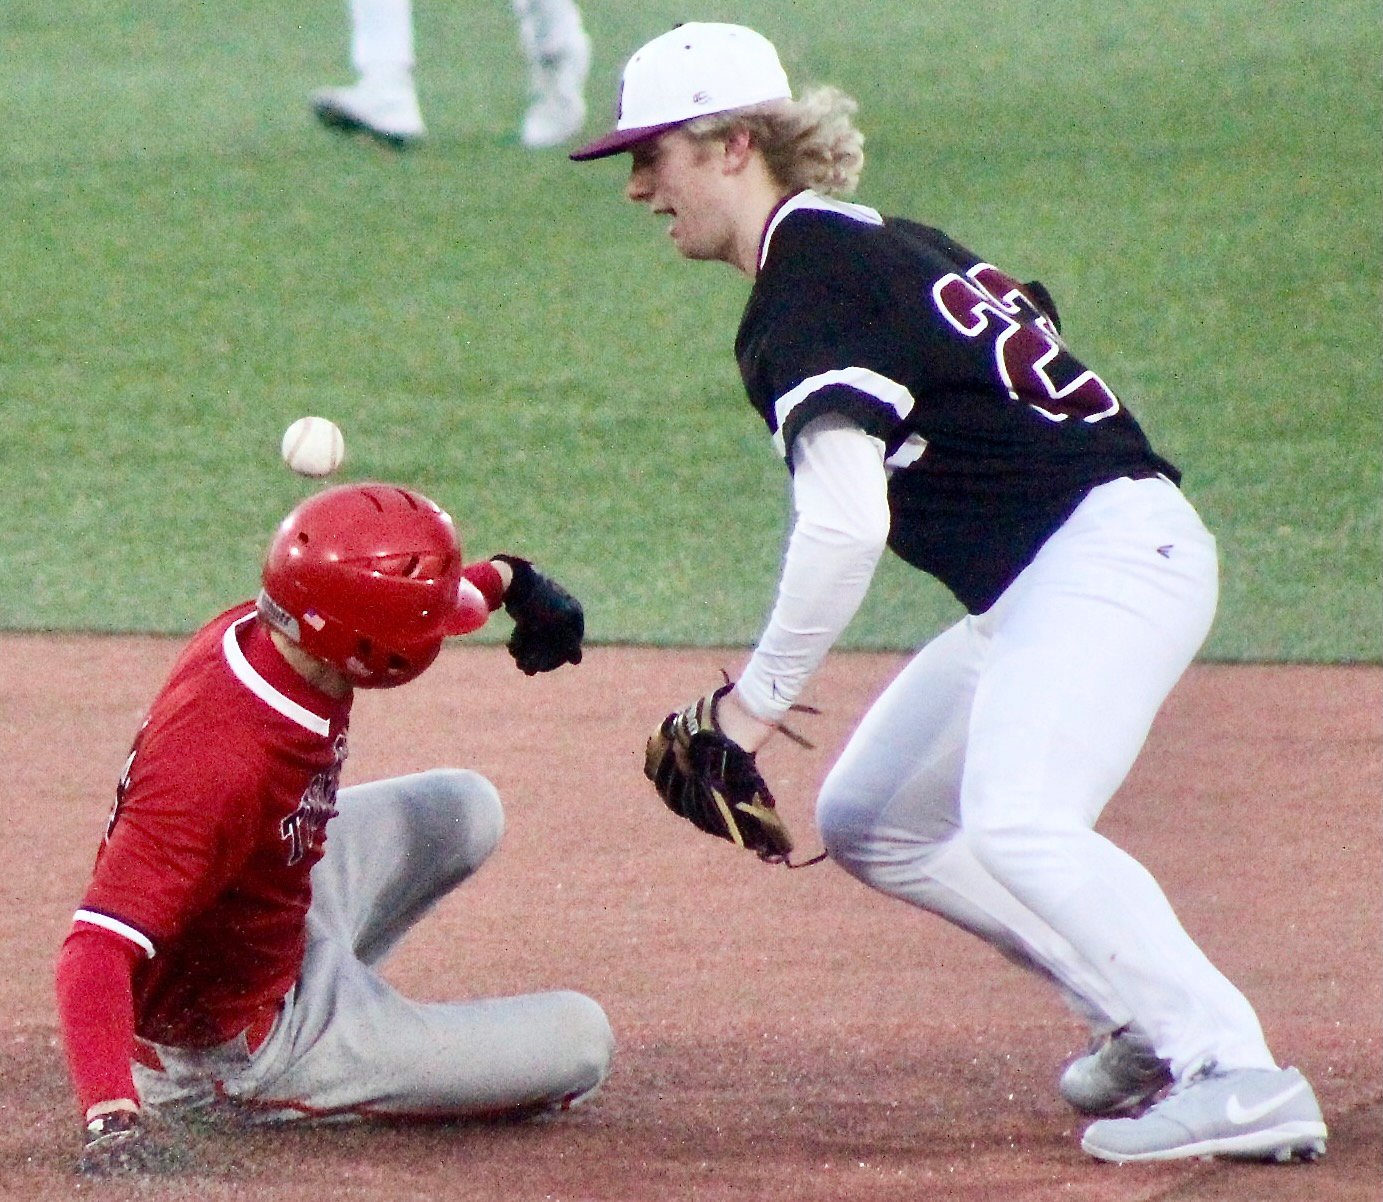 OZARK'S BROCK DODD slides into second base as a Rogersville infielder loses control of the ball. Dodd was called out on the play.